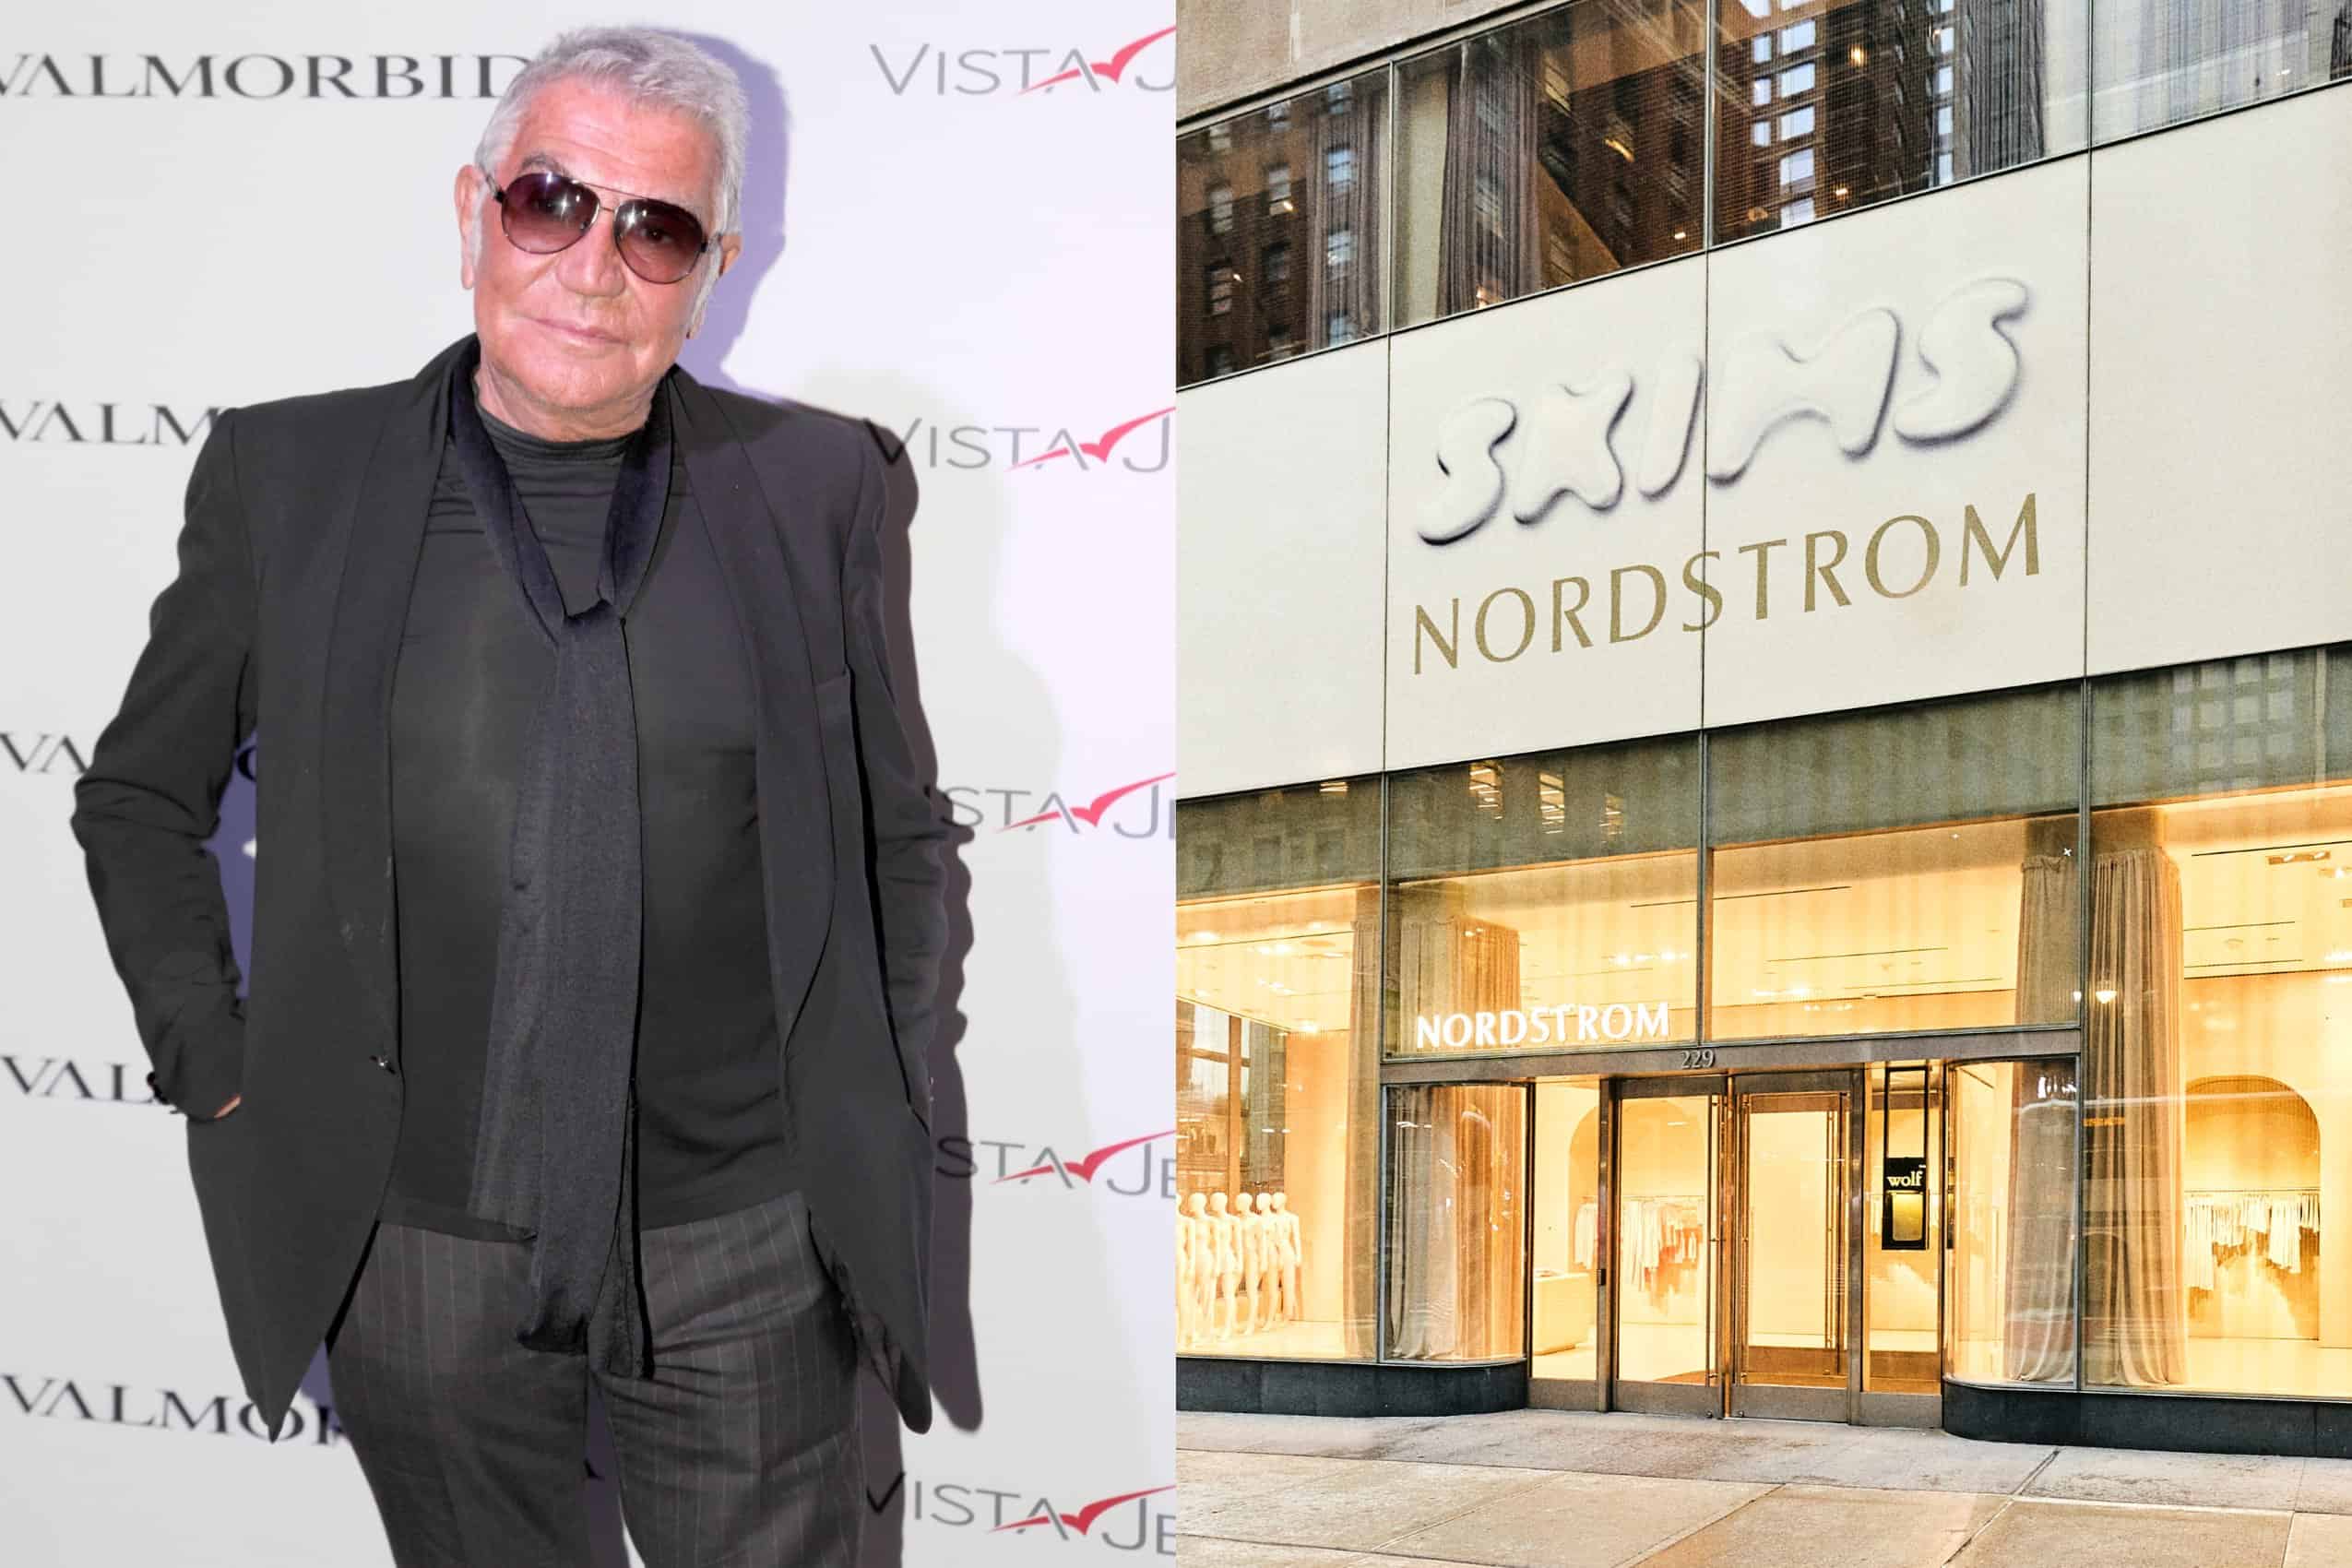 Roberto Cavalli Dies at 83, SKIMS Goes To Nordstrom, & More Fashion News